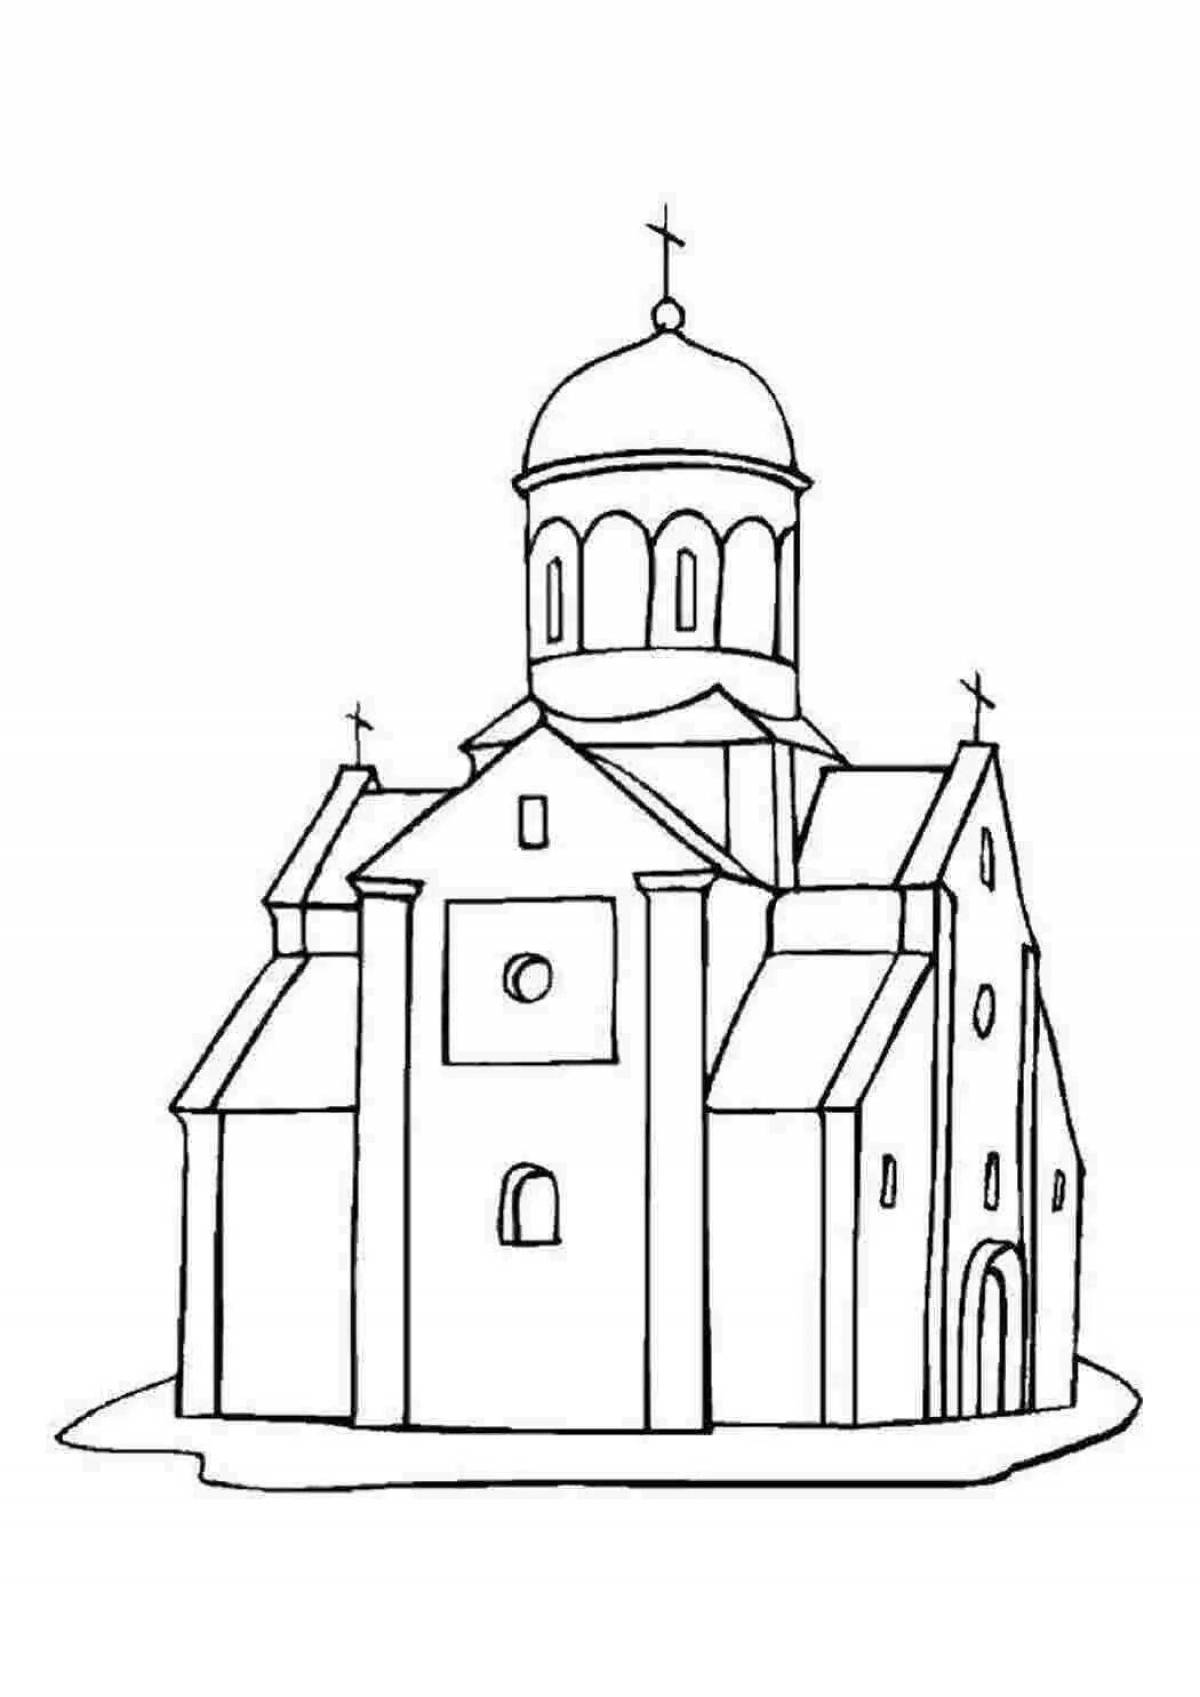 Fairytale orthodox church coloring pages for kids